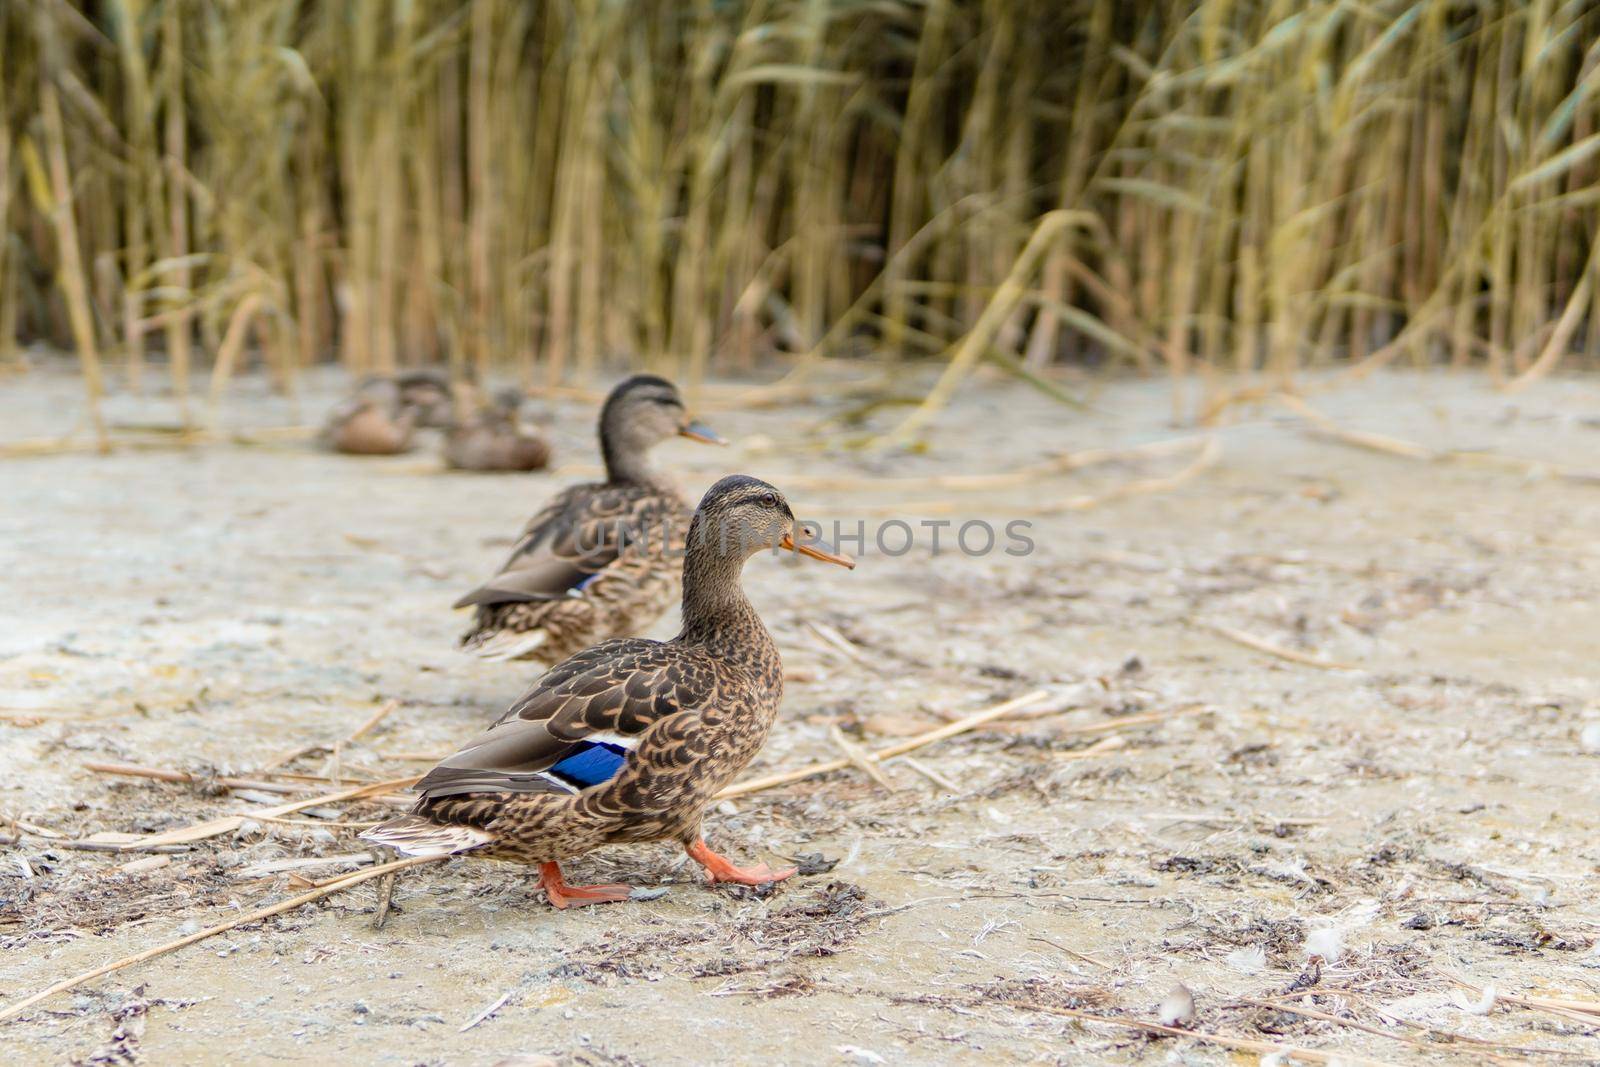 Ducks On The Beach 2 - In The Background Reeds by banate